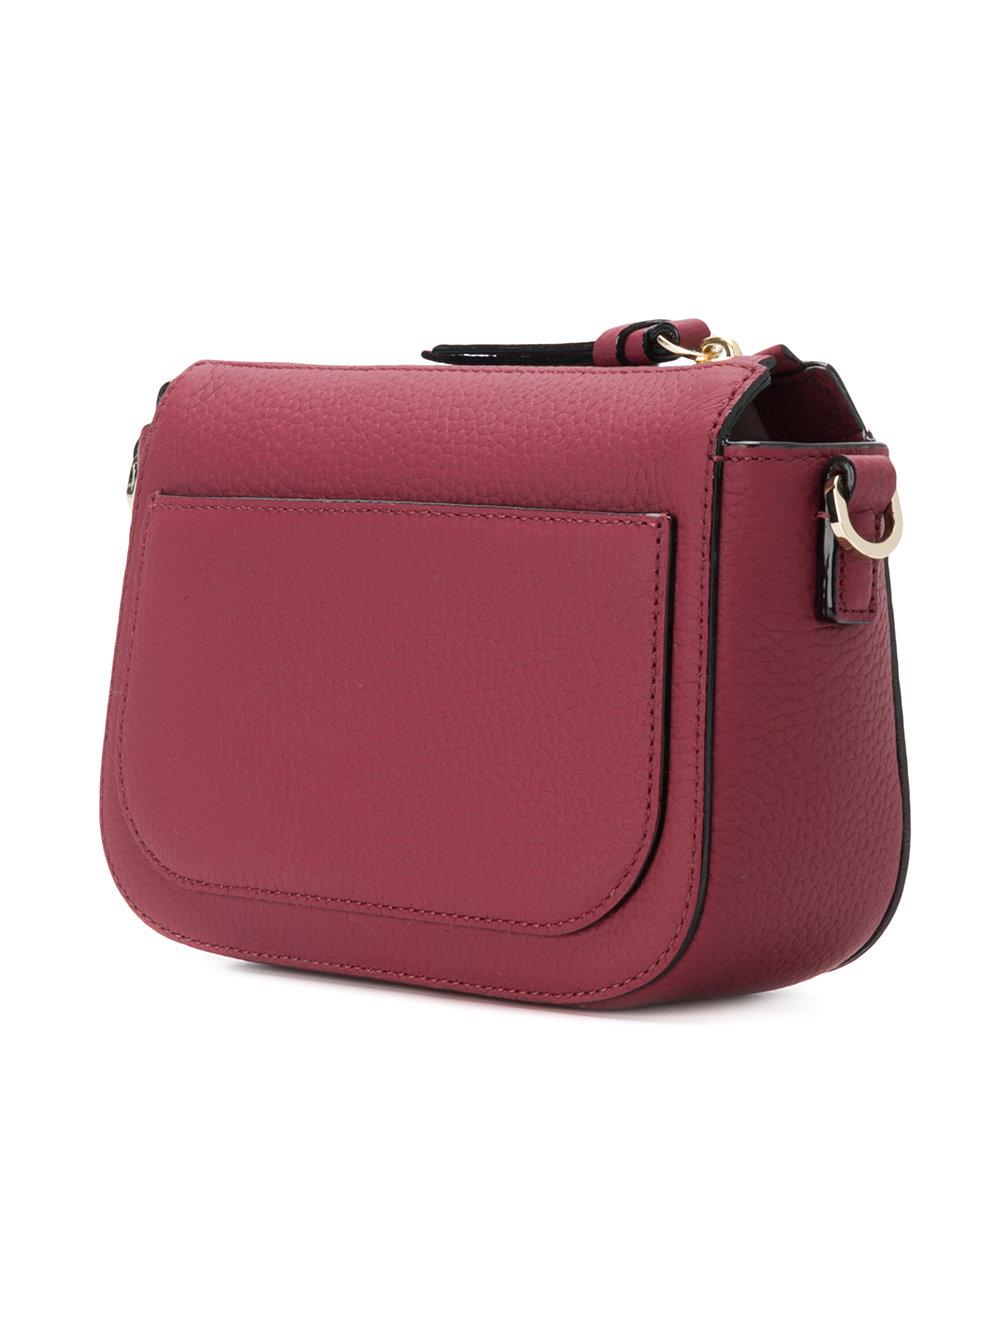 Kate Spade Leather Wendi Crossbody Bag in Red - Lyst